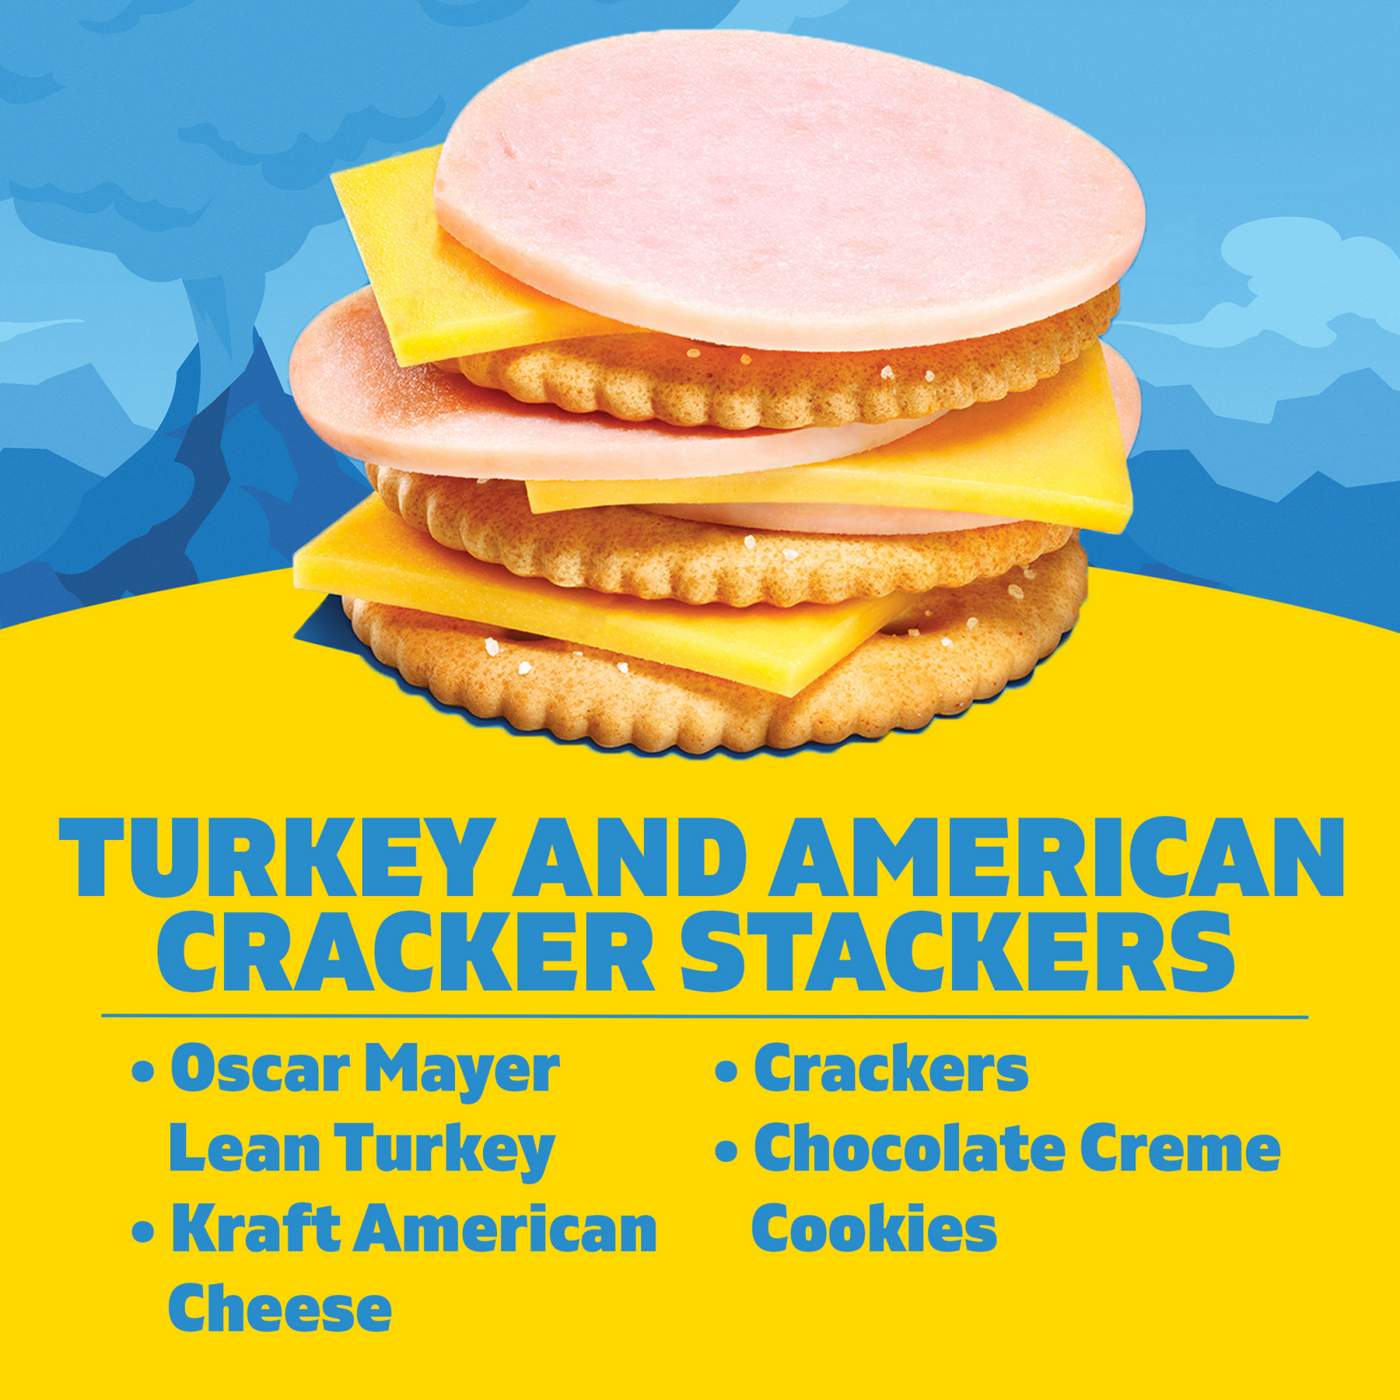 Lunchables Snack Kit Tray - Turkey & American Cracker Stackers with Chocolate Creme Cookies; image 7 of 7